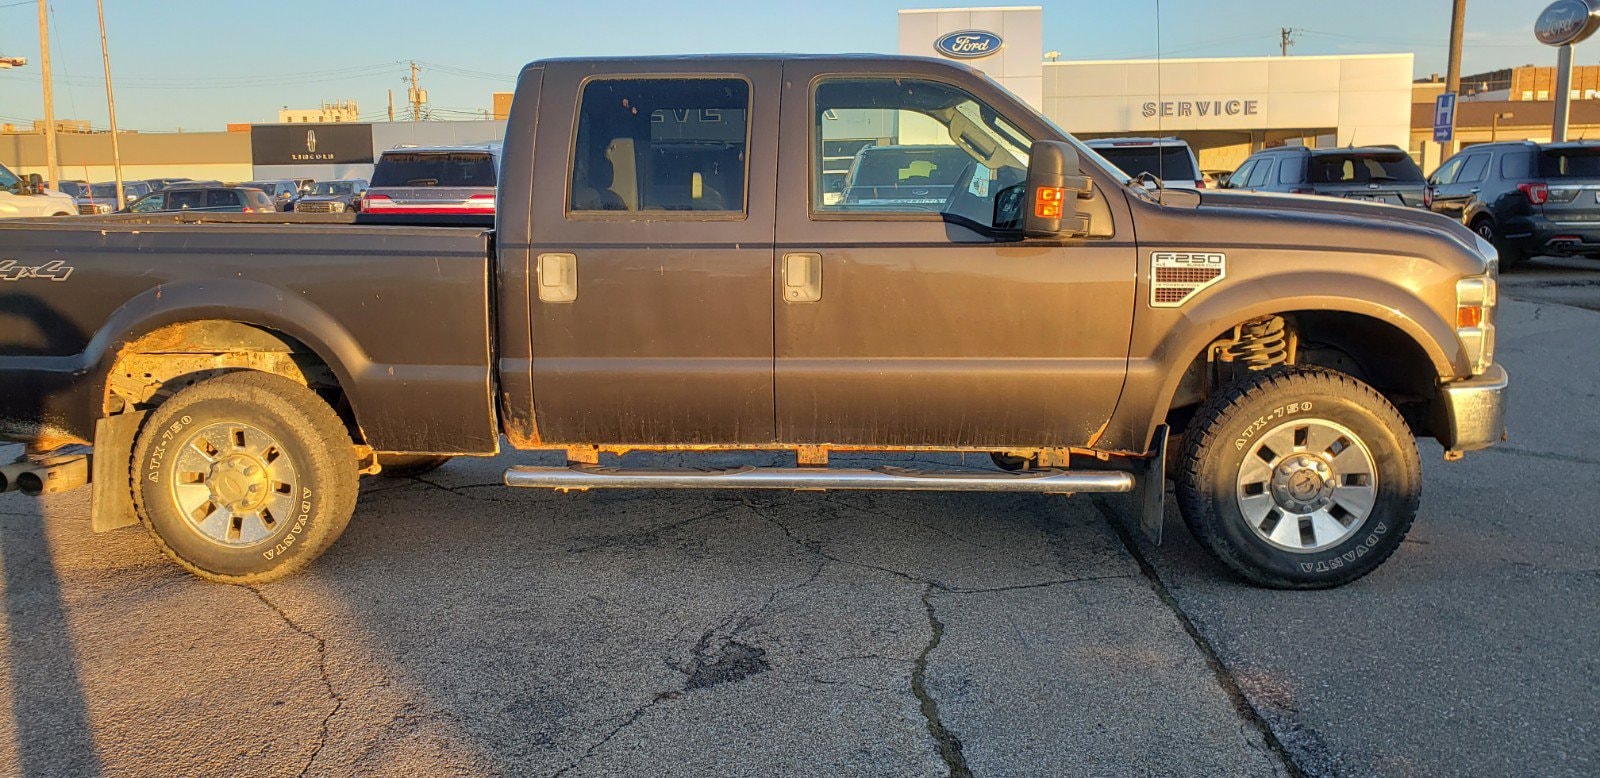 Used 2008 Ford F-250 Super Duty Lariat with VIN 1FTSW21R08ED06324 for sale in Grinnell, IA